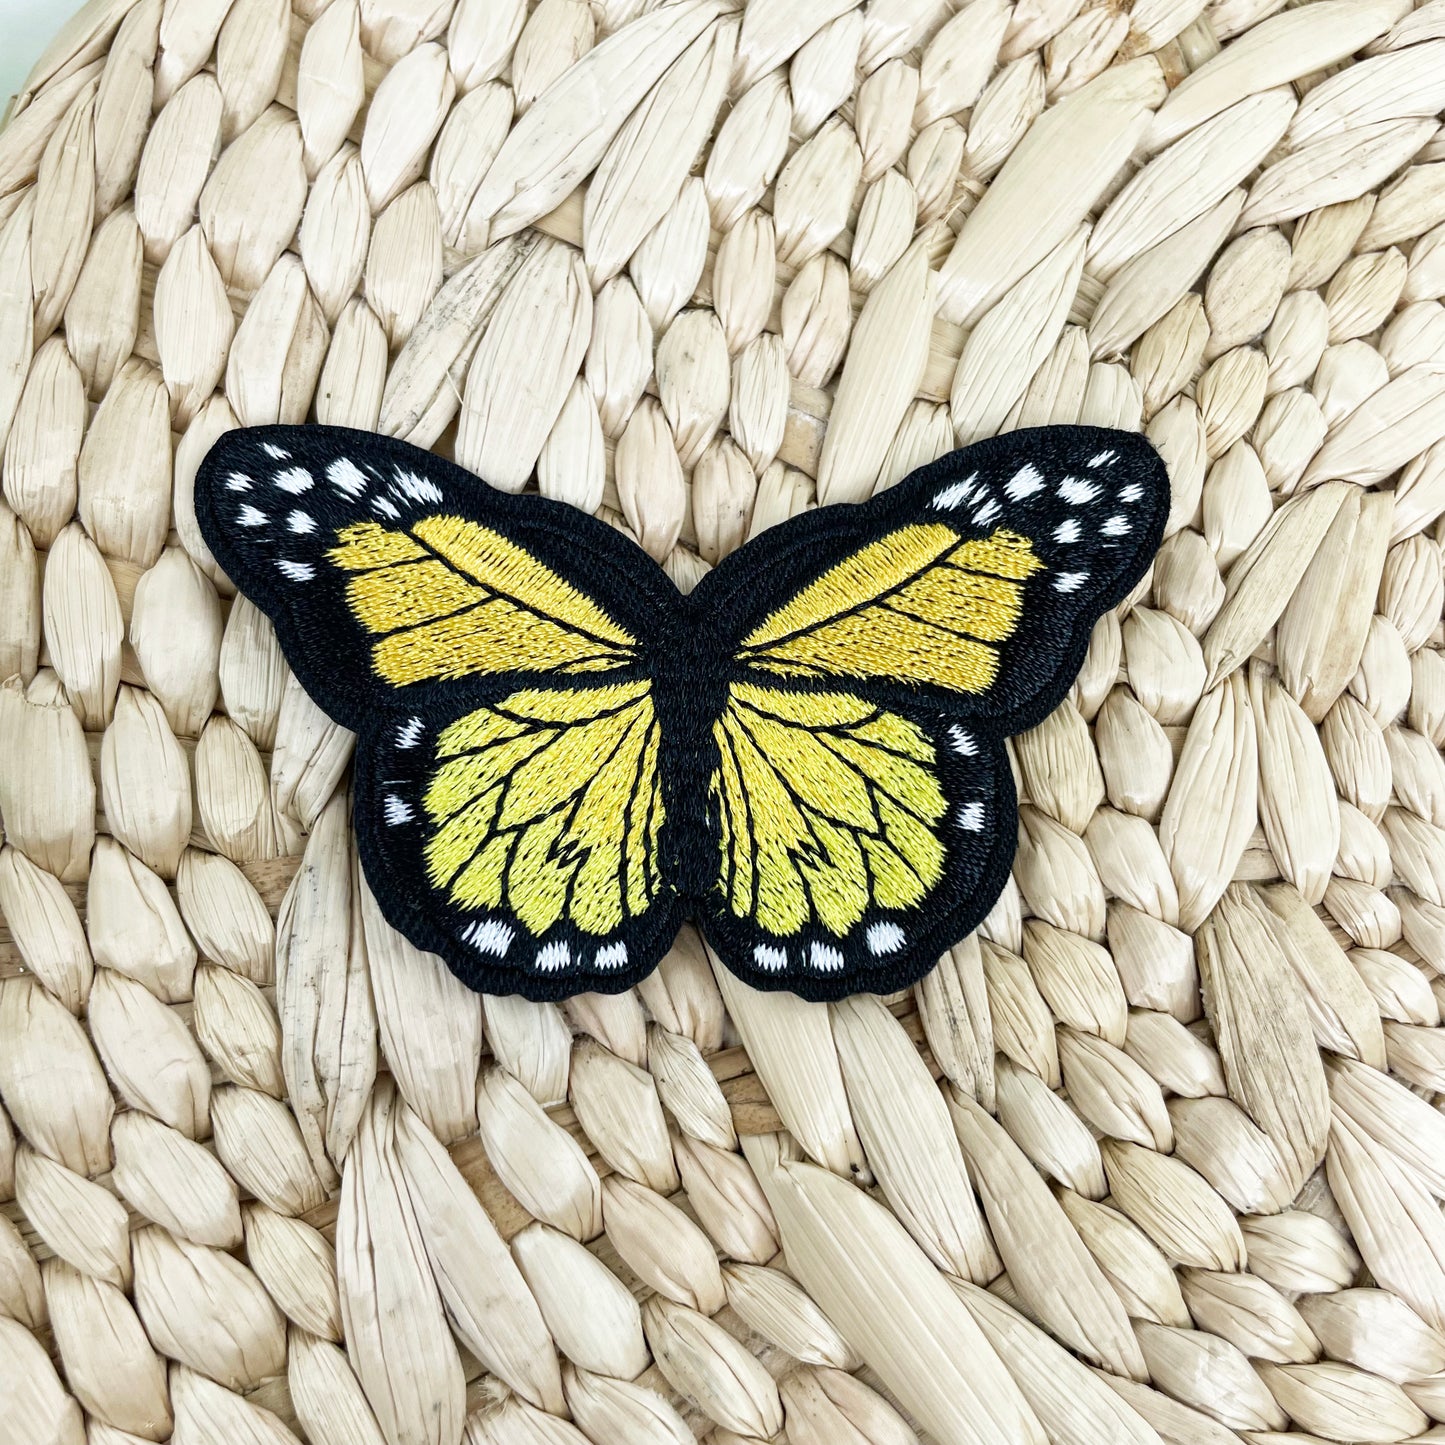 Iron-On Butterfly Patches - Multiple Sizes and Colors